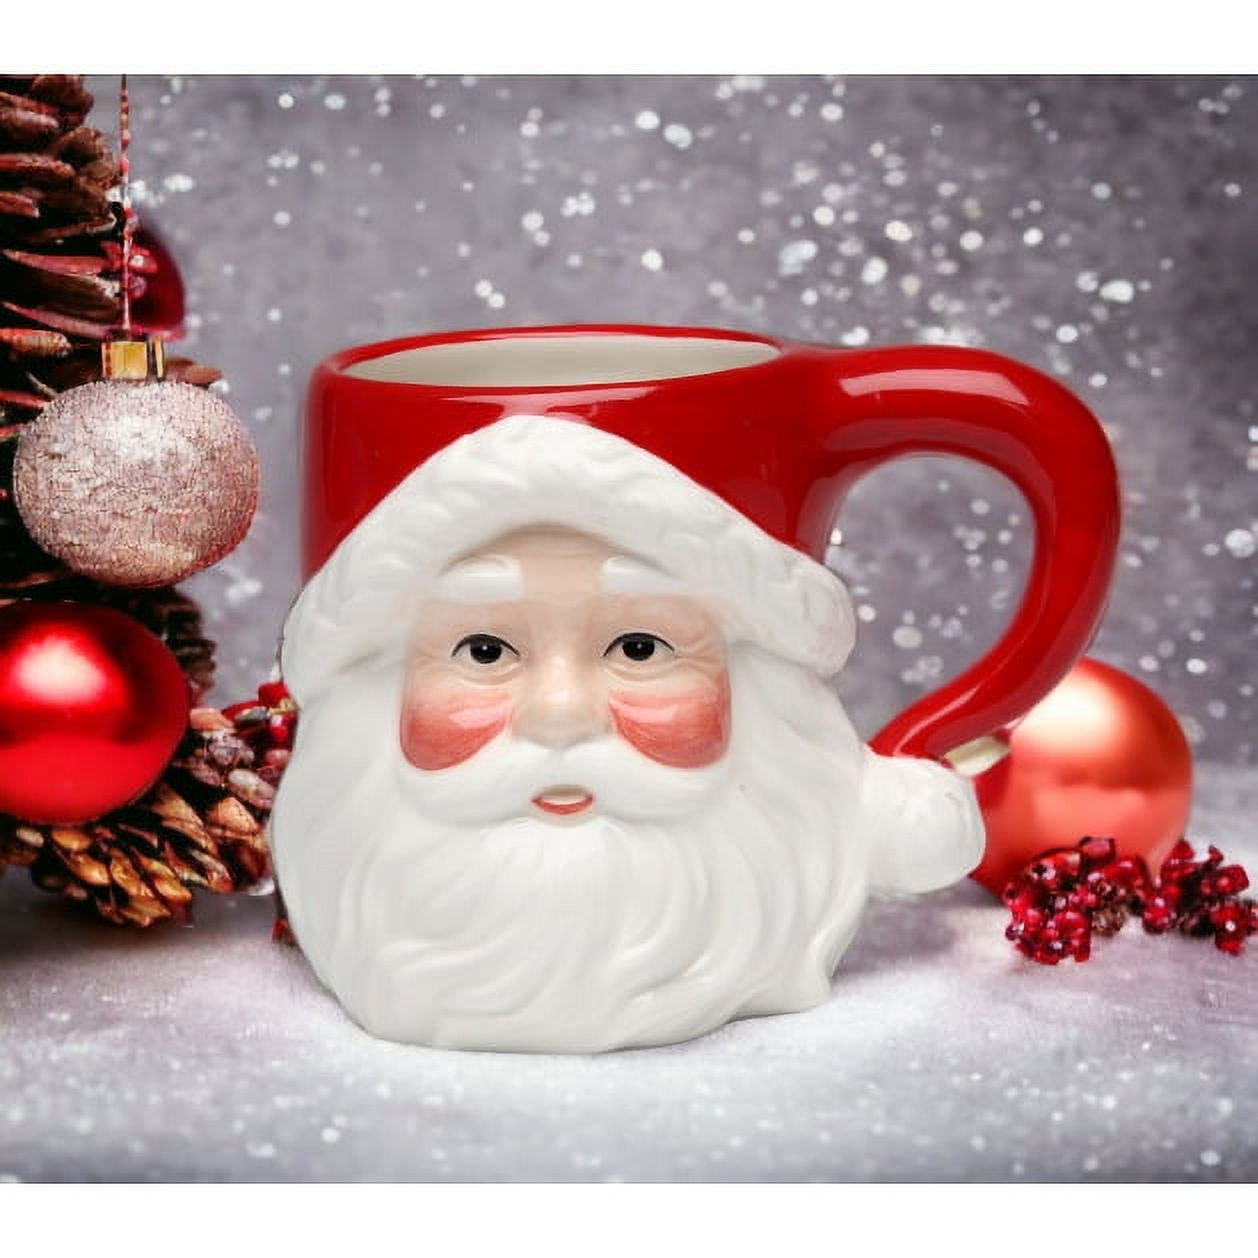 12pcs Christmas Plastic Cups Santa Belt Pattern Home Beverage Drinking Cup Holiday Party Tableware and Party Supplies (Cups and Straw, 6pcs for Each)